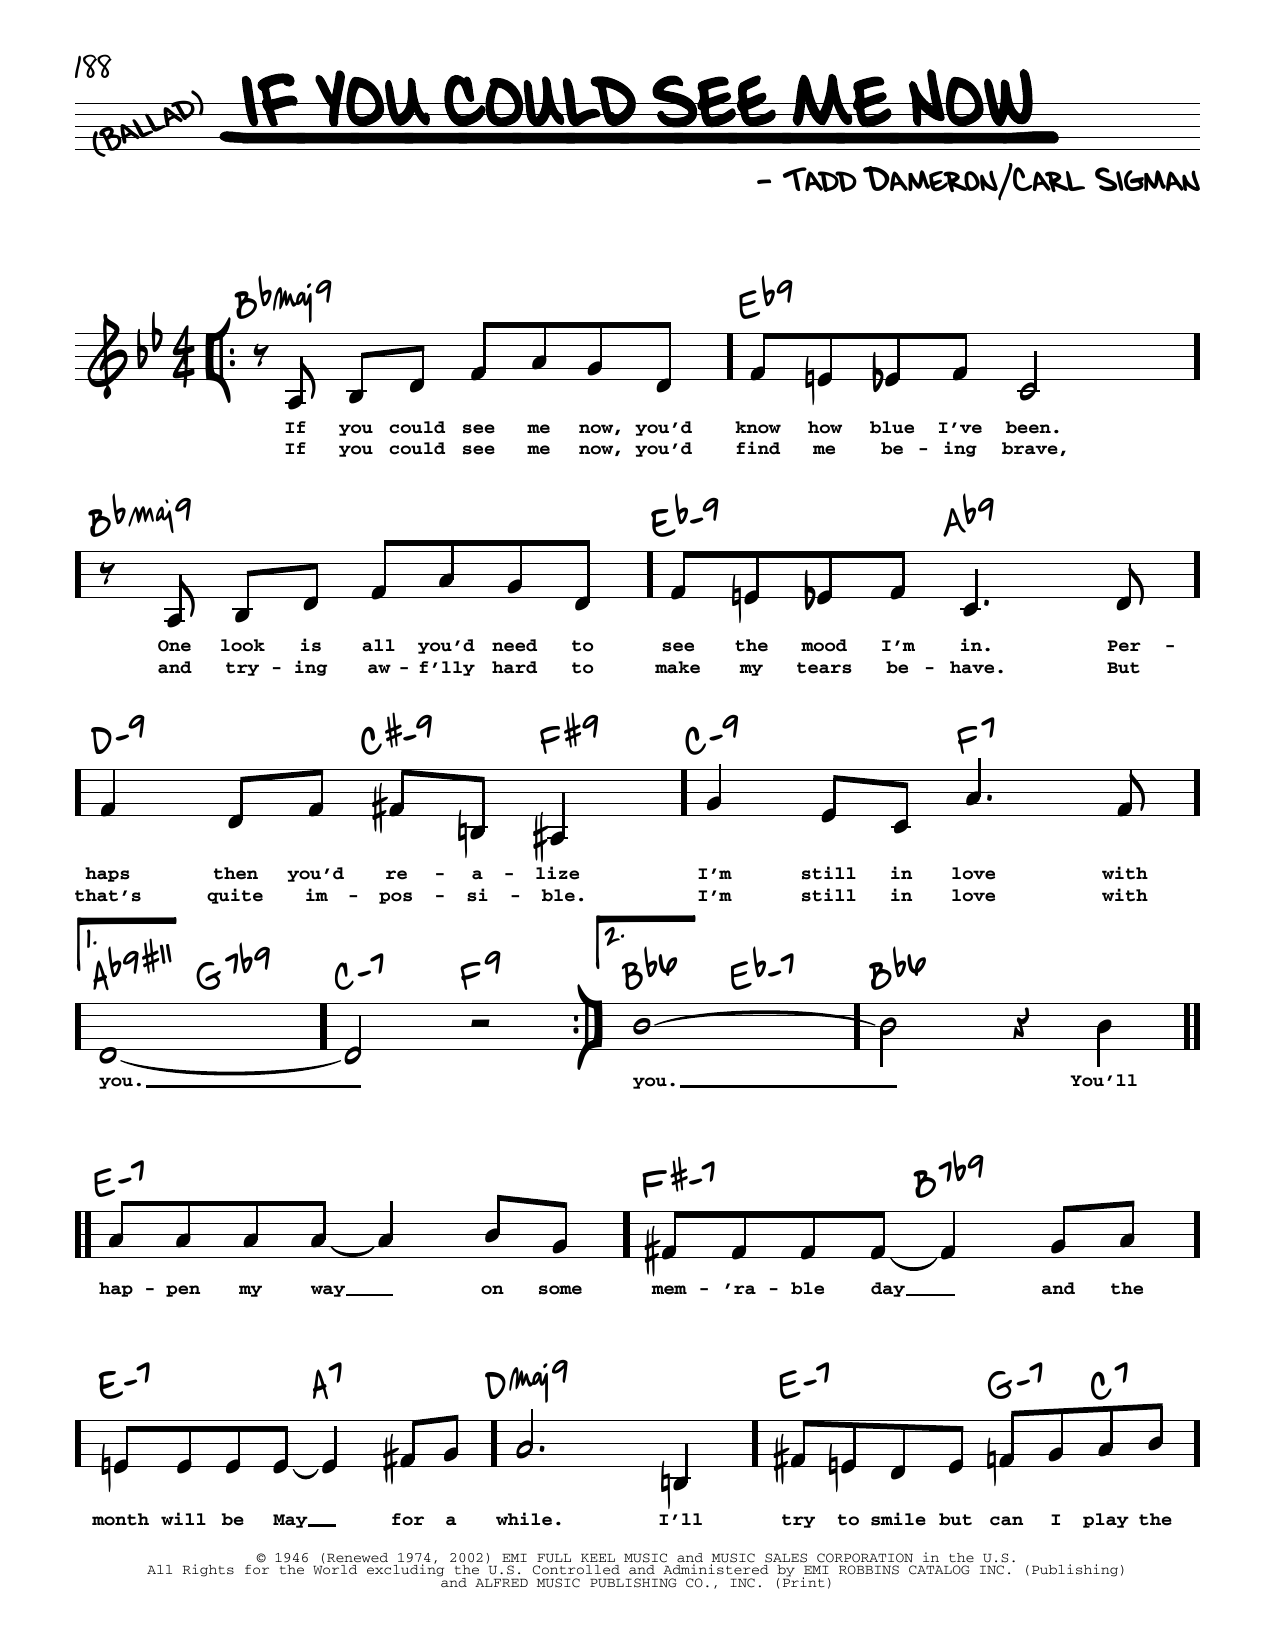 Carl Sigman If You Could See Me Now (Low Voice) sheet music notes printable PDF score